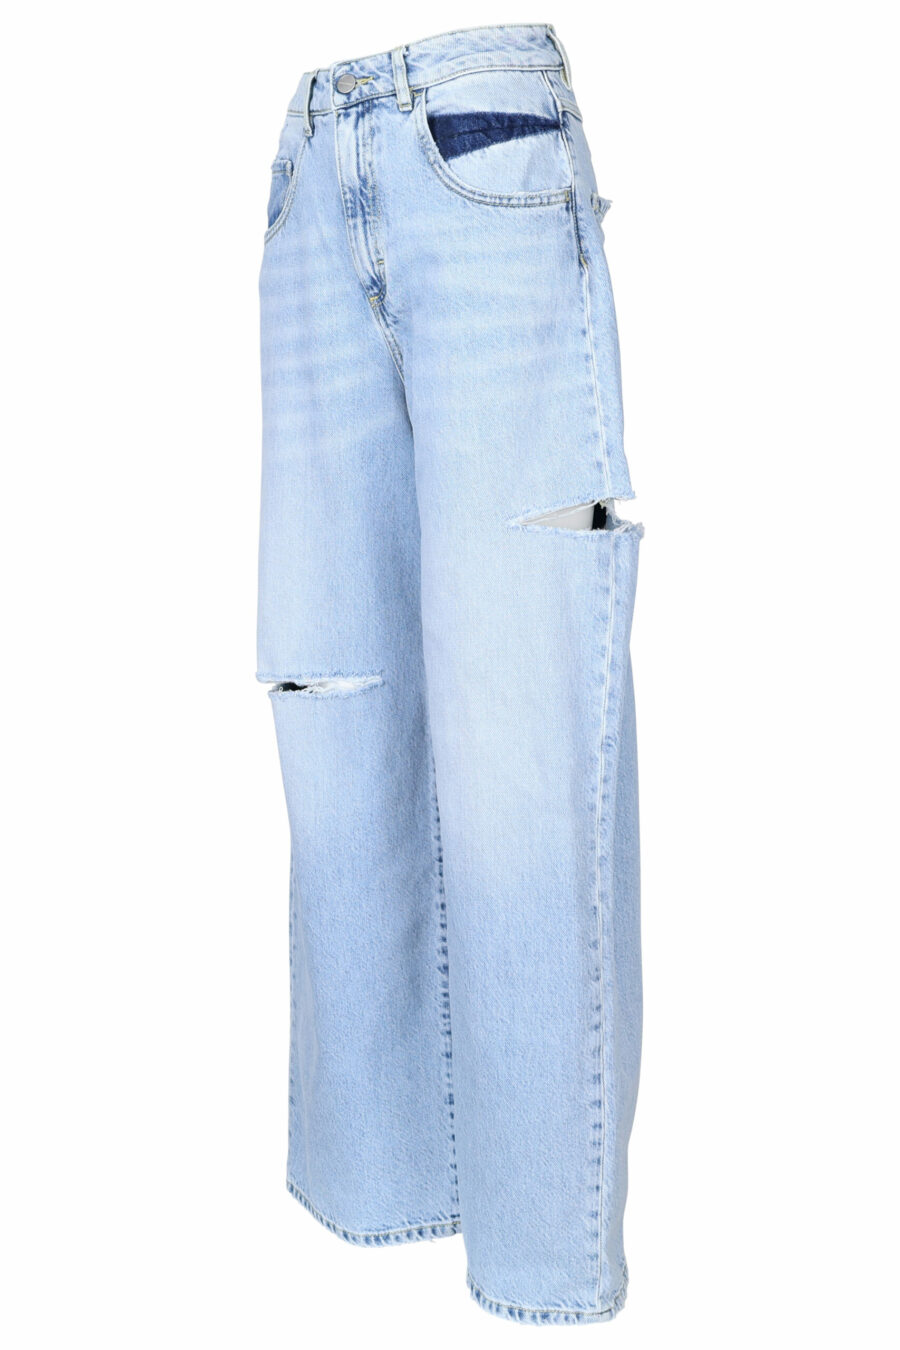 Blue "poppy" jeans with rips - 8052691167298 1 scaled